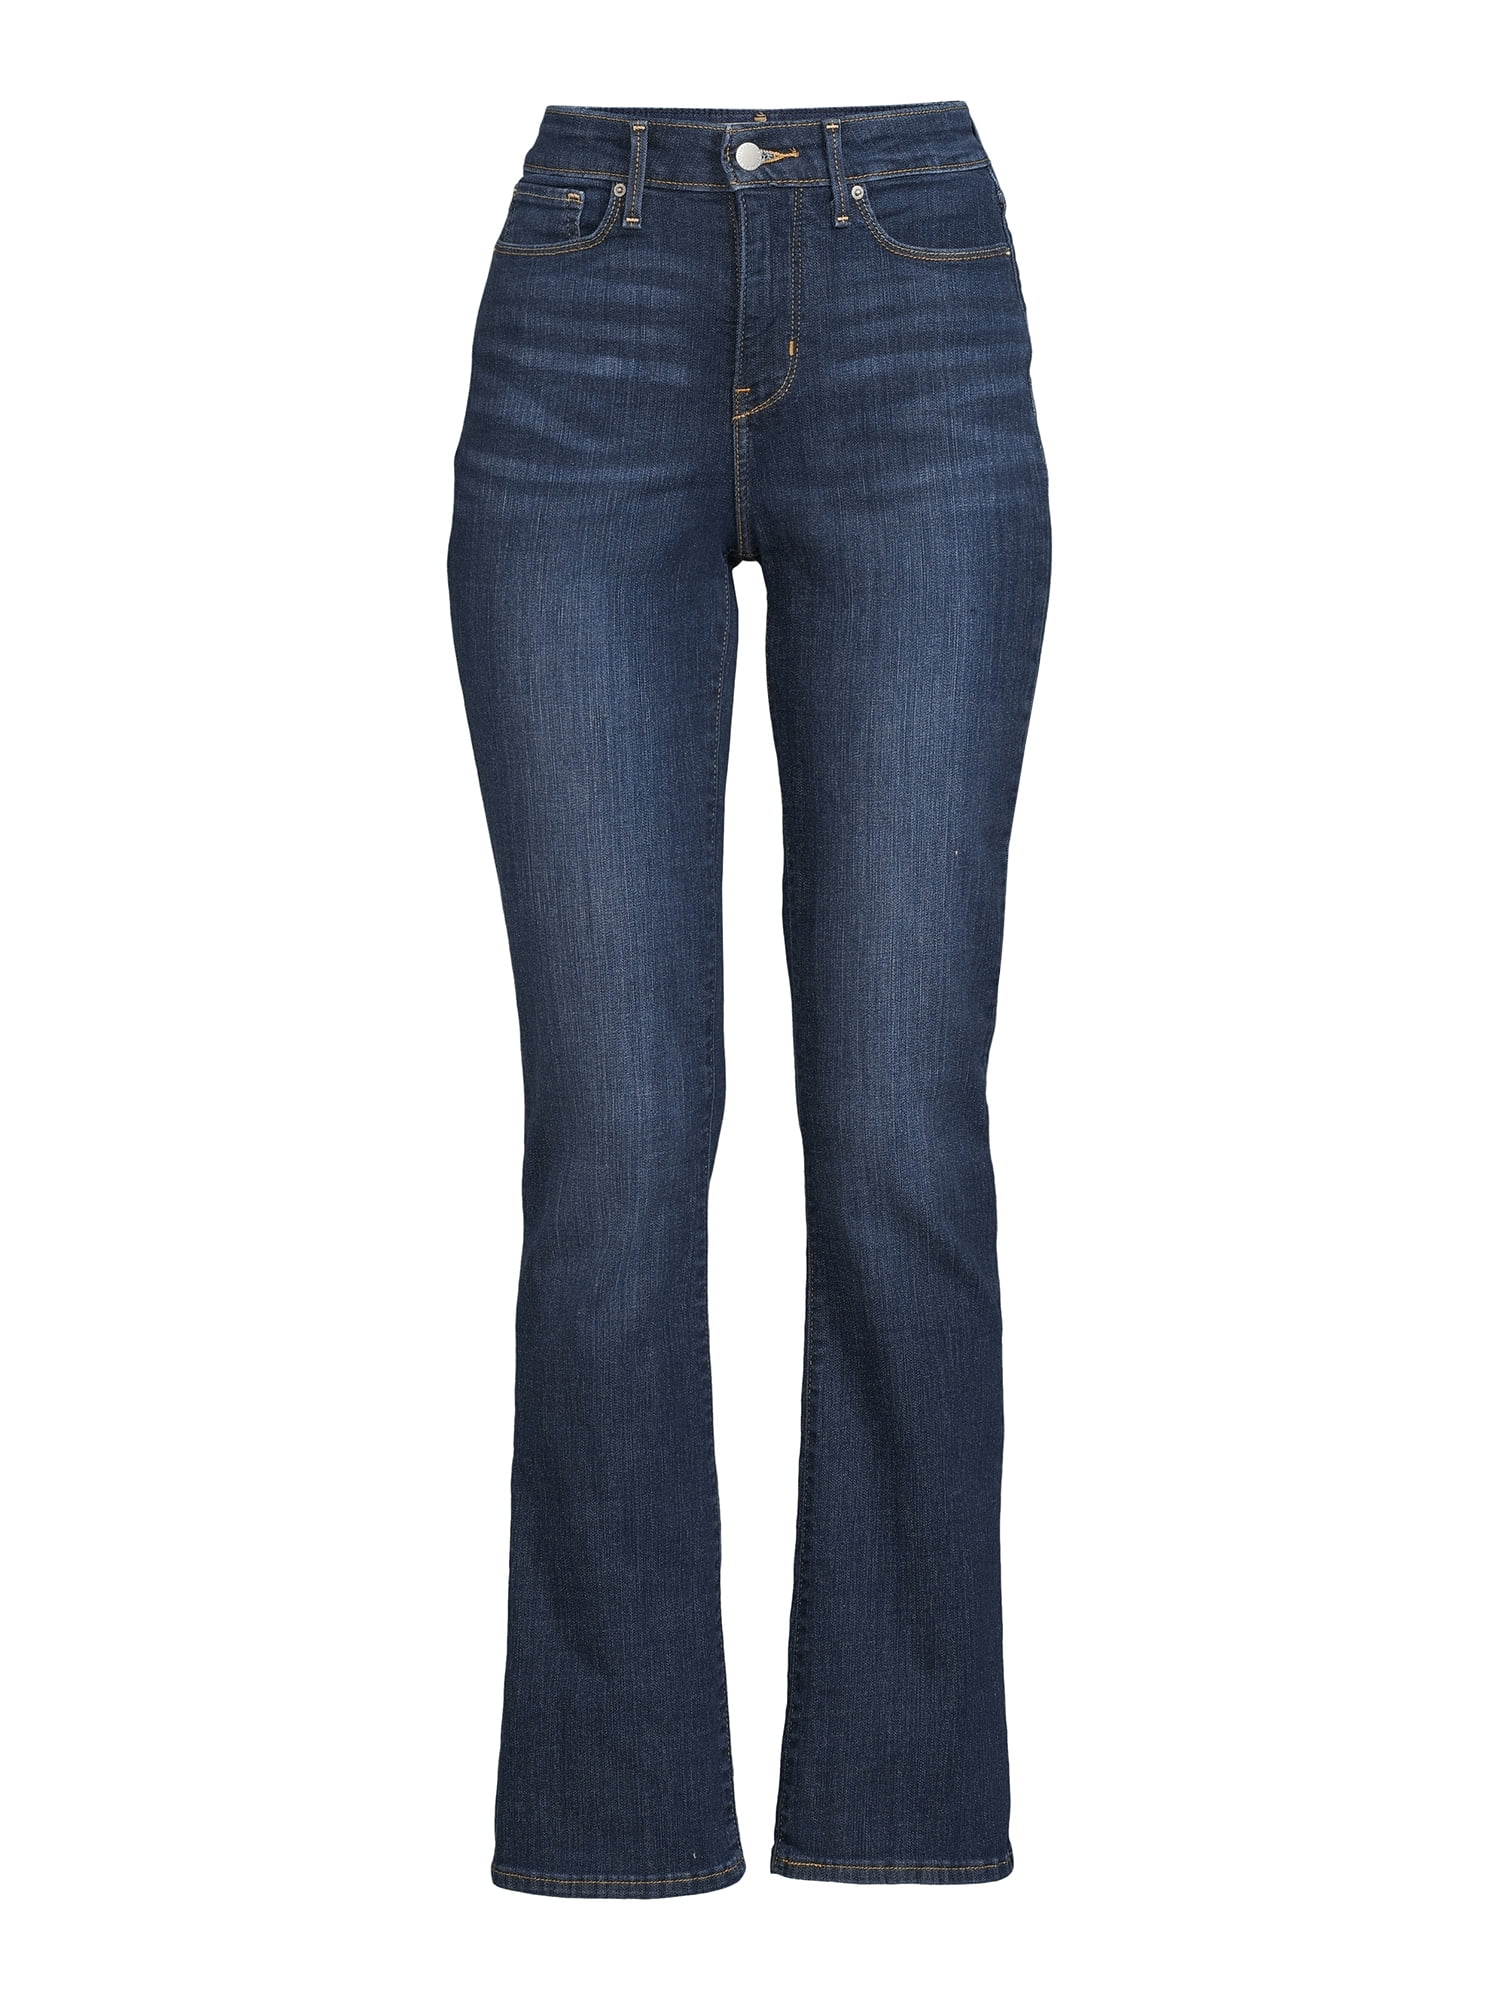 Signature by Levi Strauss & Co. Women's Shaping Mid Rise Bootcut Jeans -  